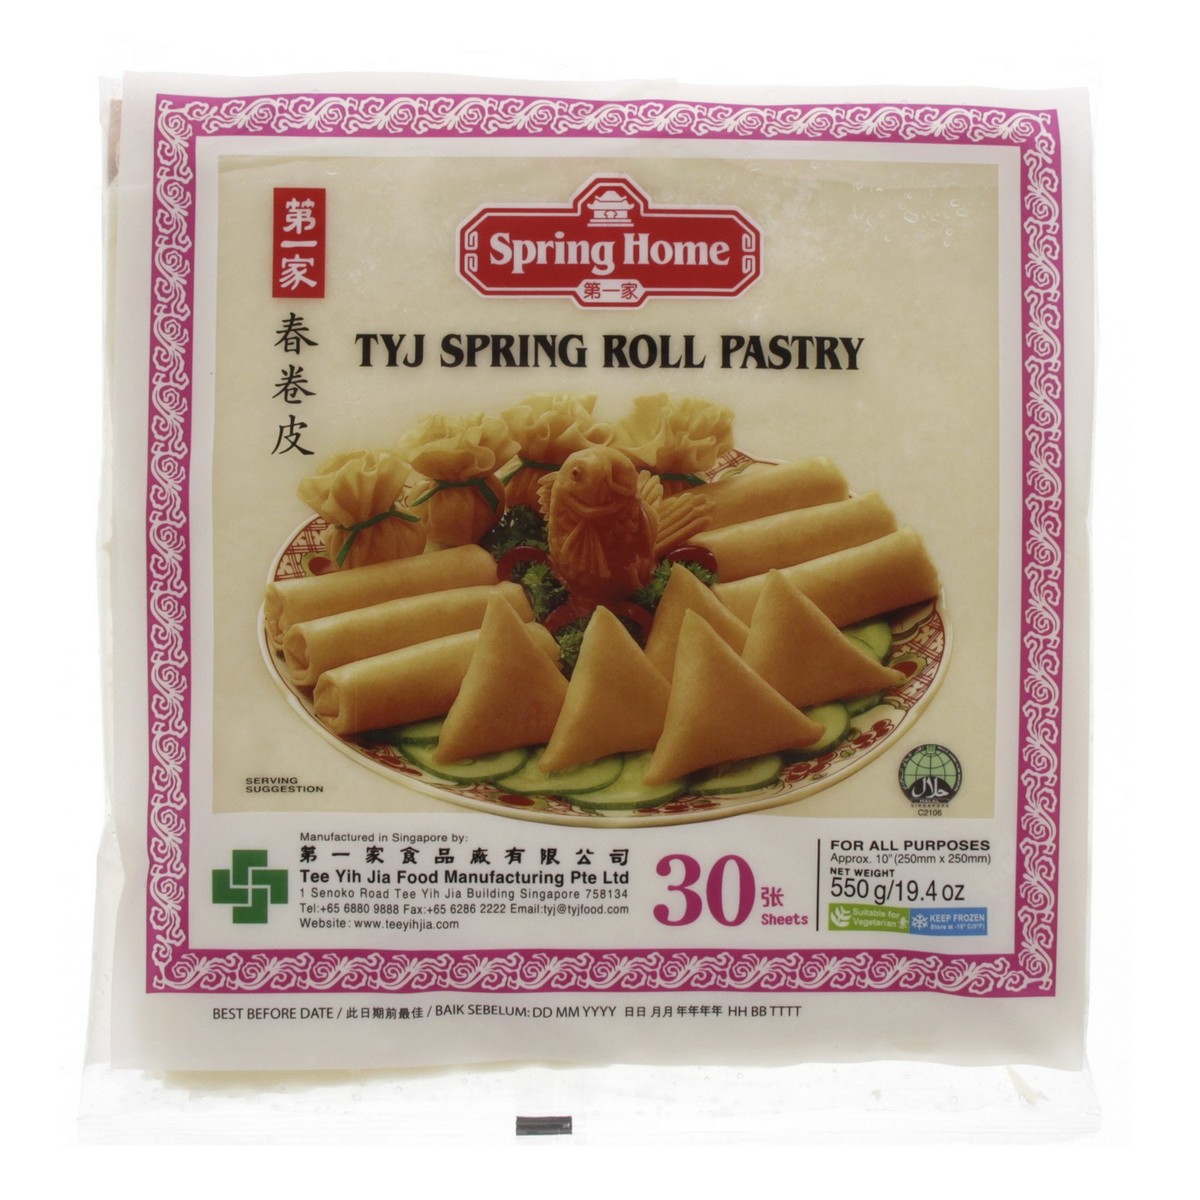 Sprin Home TYJ Spring Roll Pastry 550g